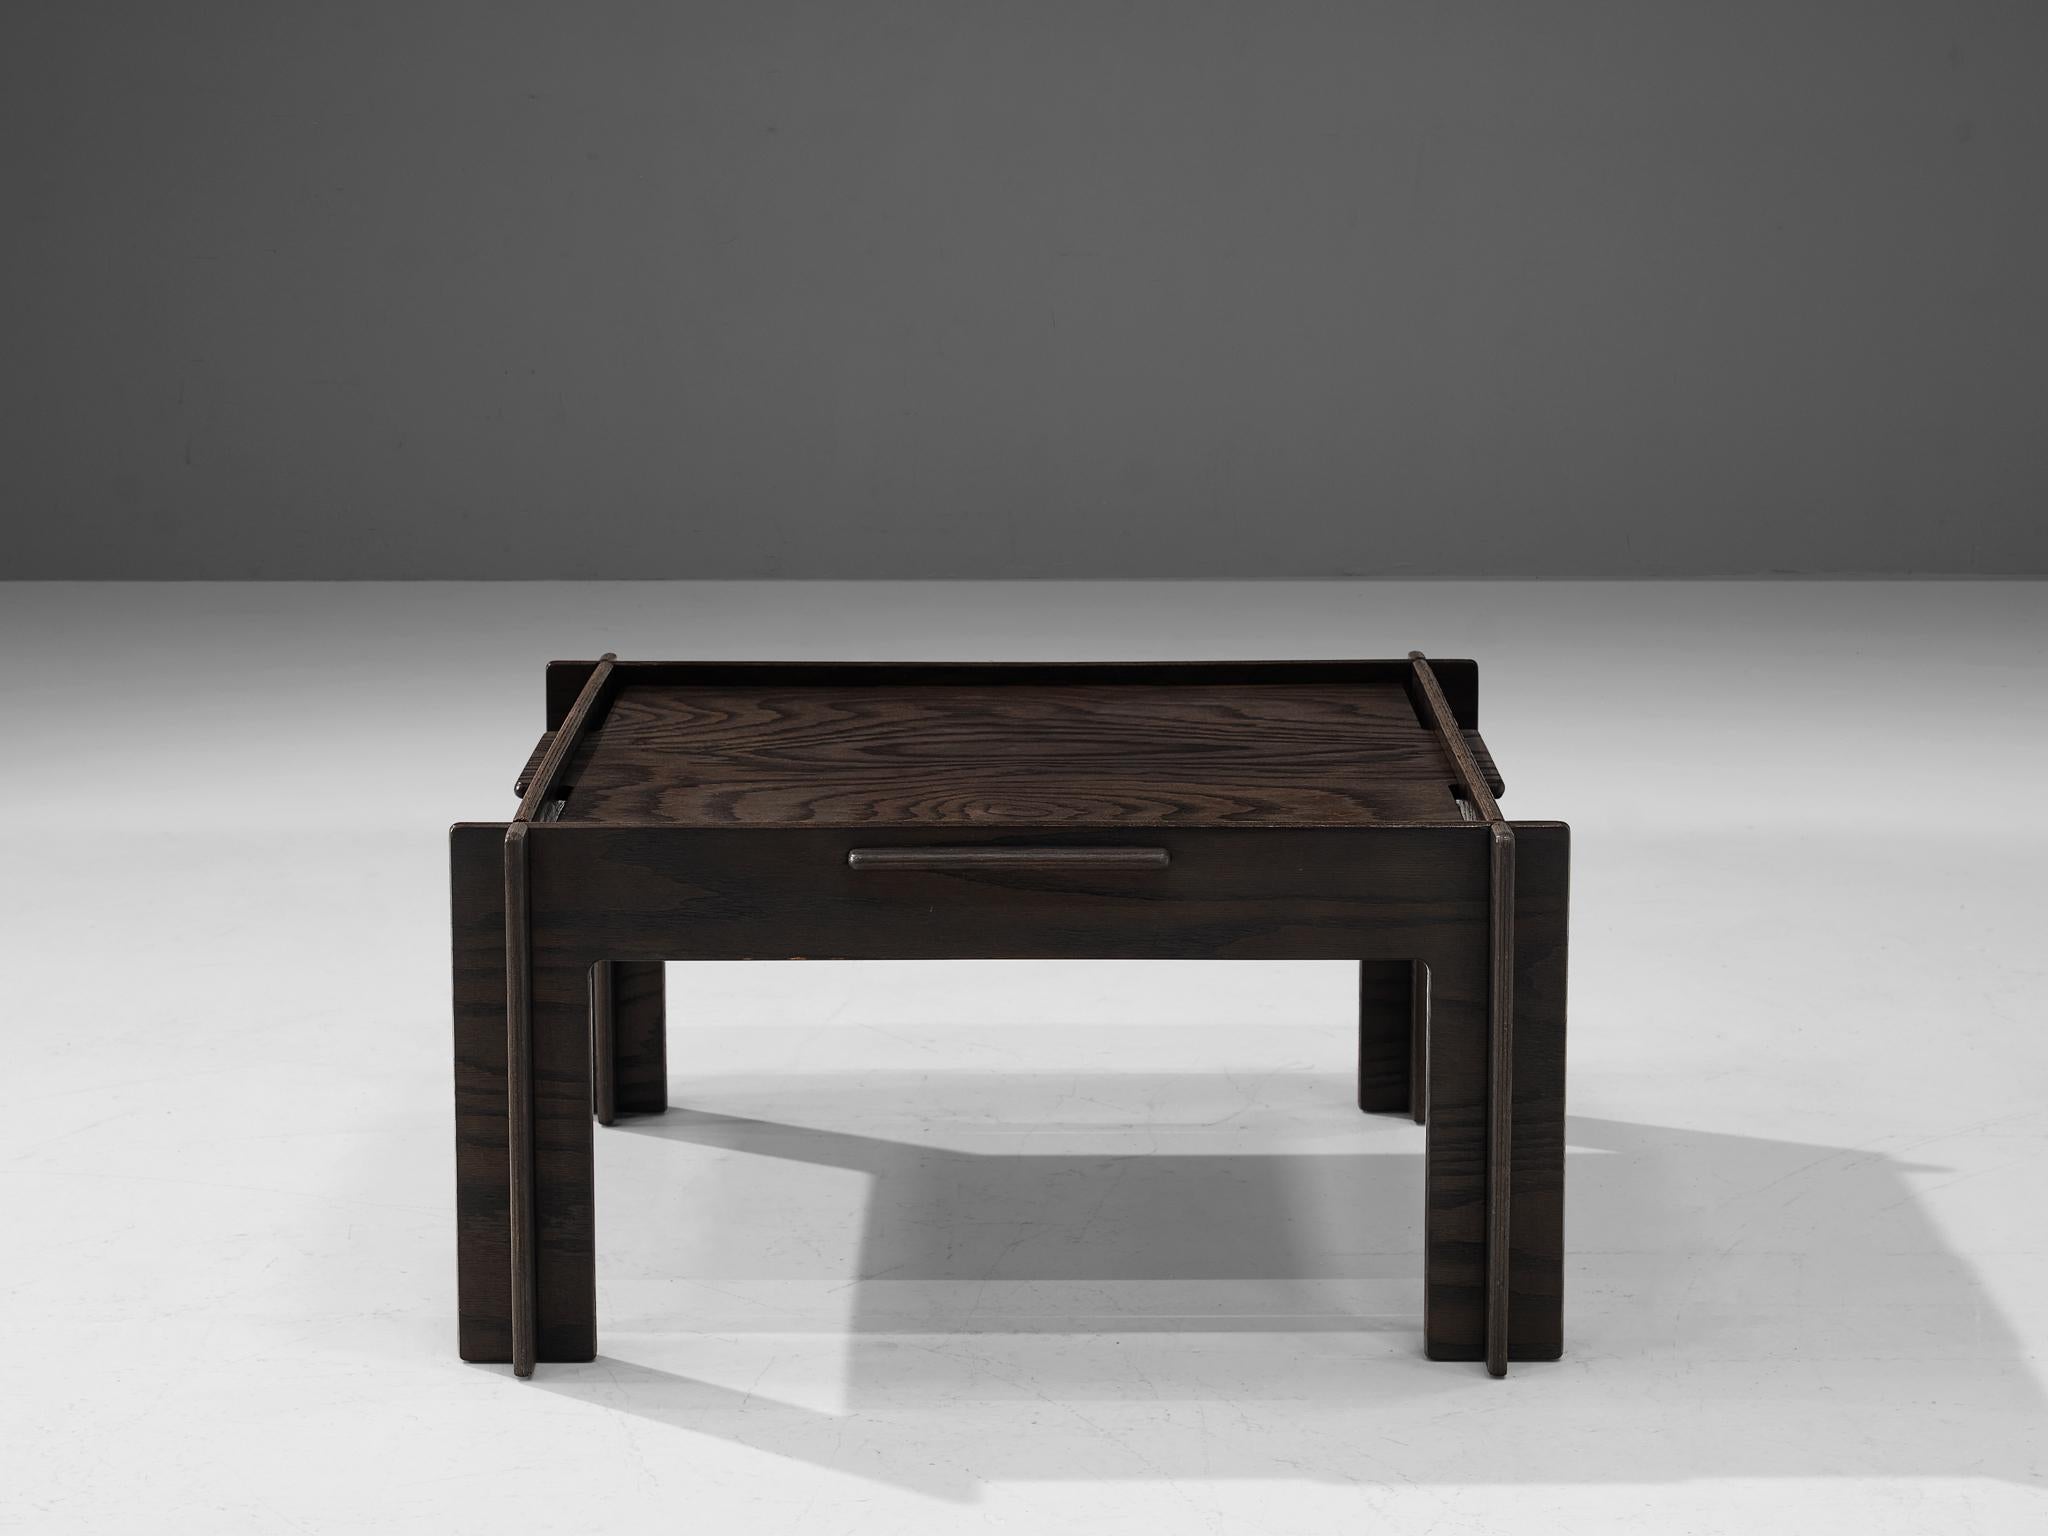 Arne Jacobsen for Asko, coffee table, model 'Rover', ash plywood, Denmark, 1968. 

Stunning, small coffee table designed by Arne Jacobsen for Asko. The coffee table has a sculptural, almost architectural look. This is mainly achieved by the